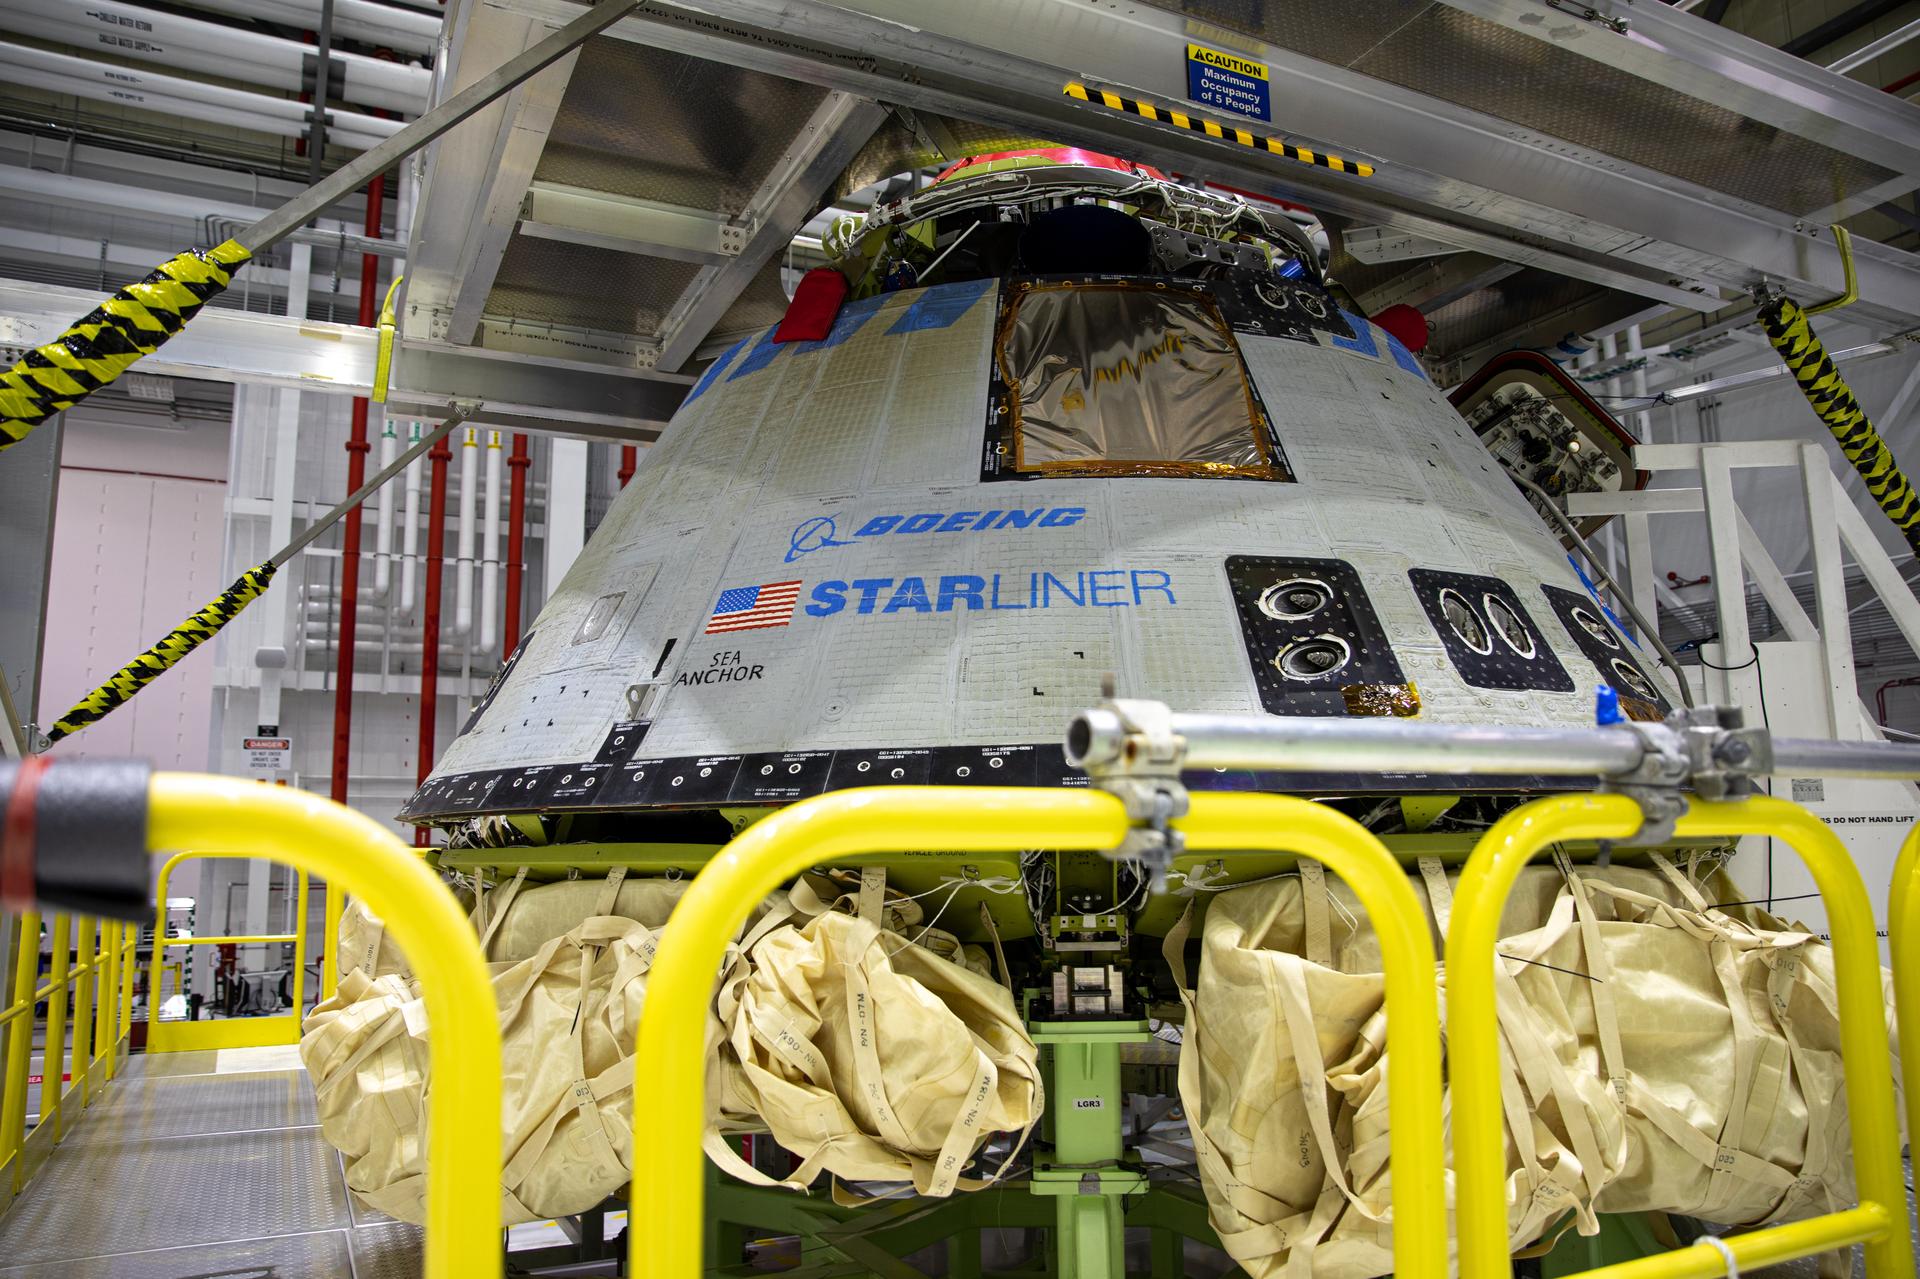 Boeing will launch a 2nd uncrewed test flight of its Starliner